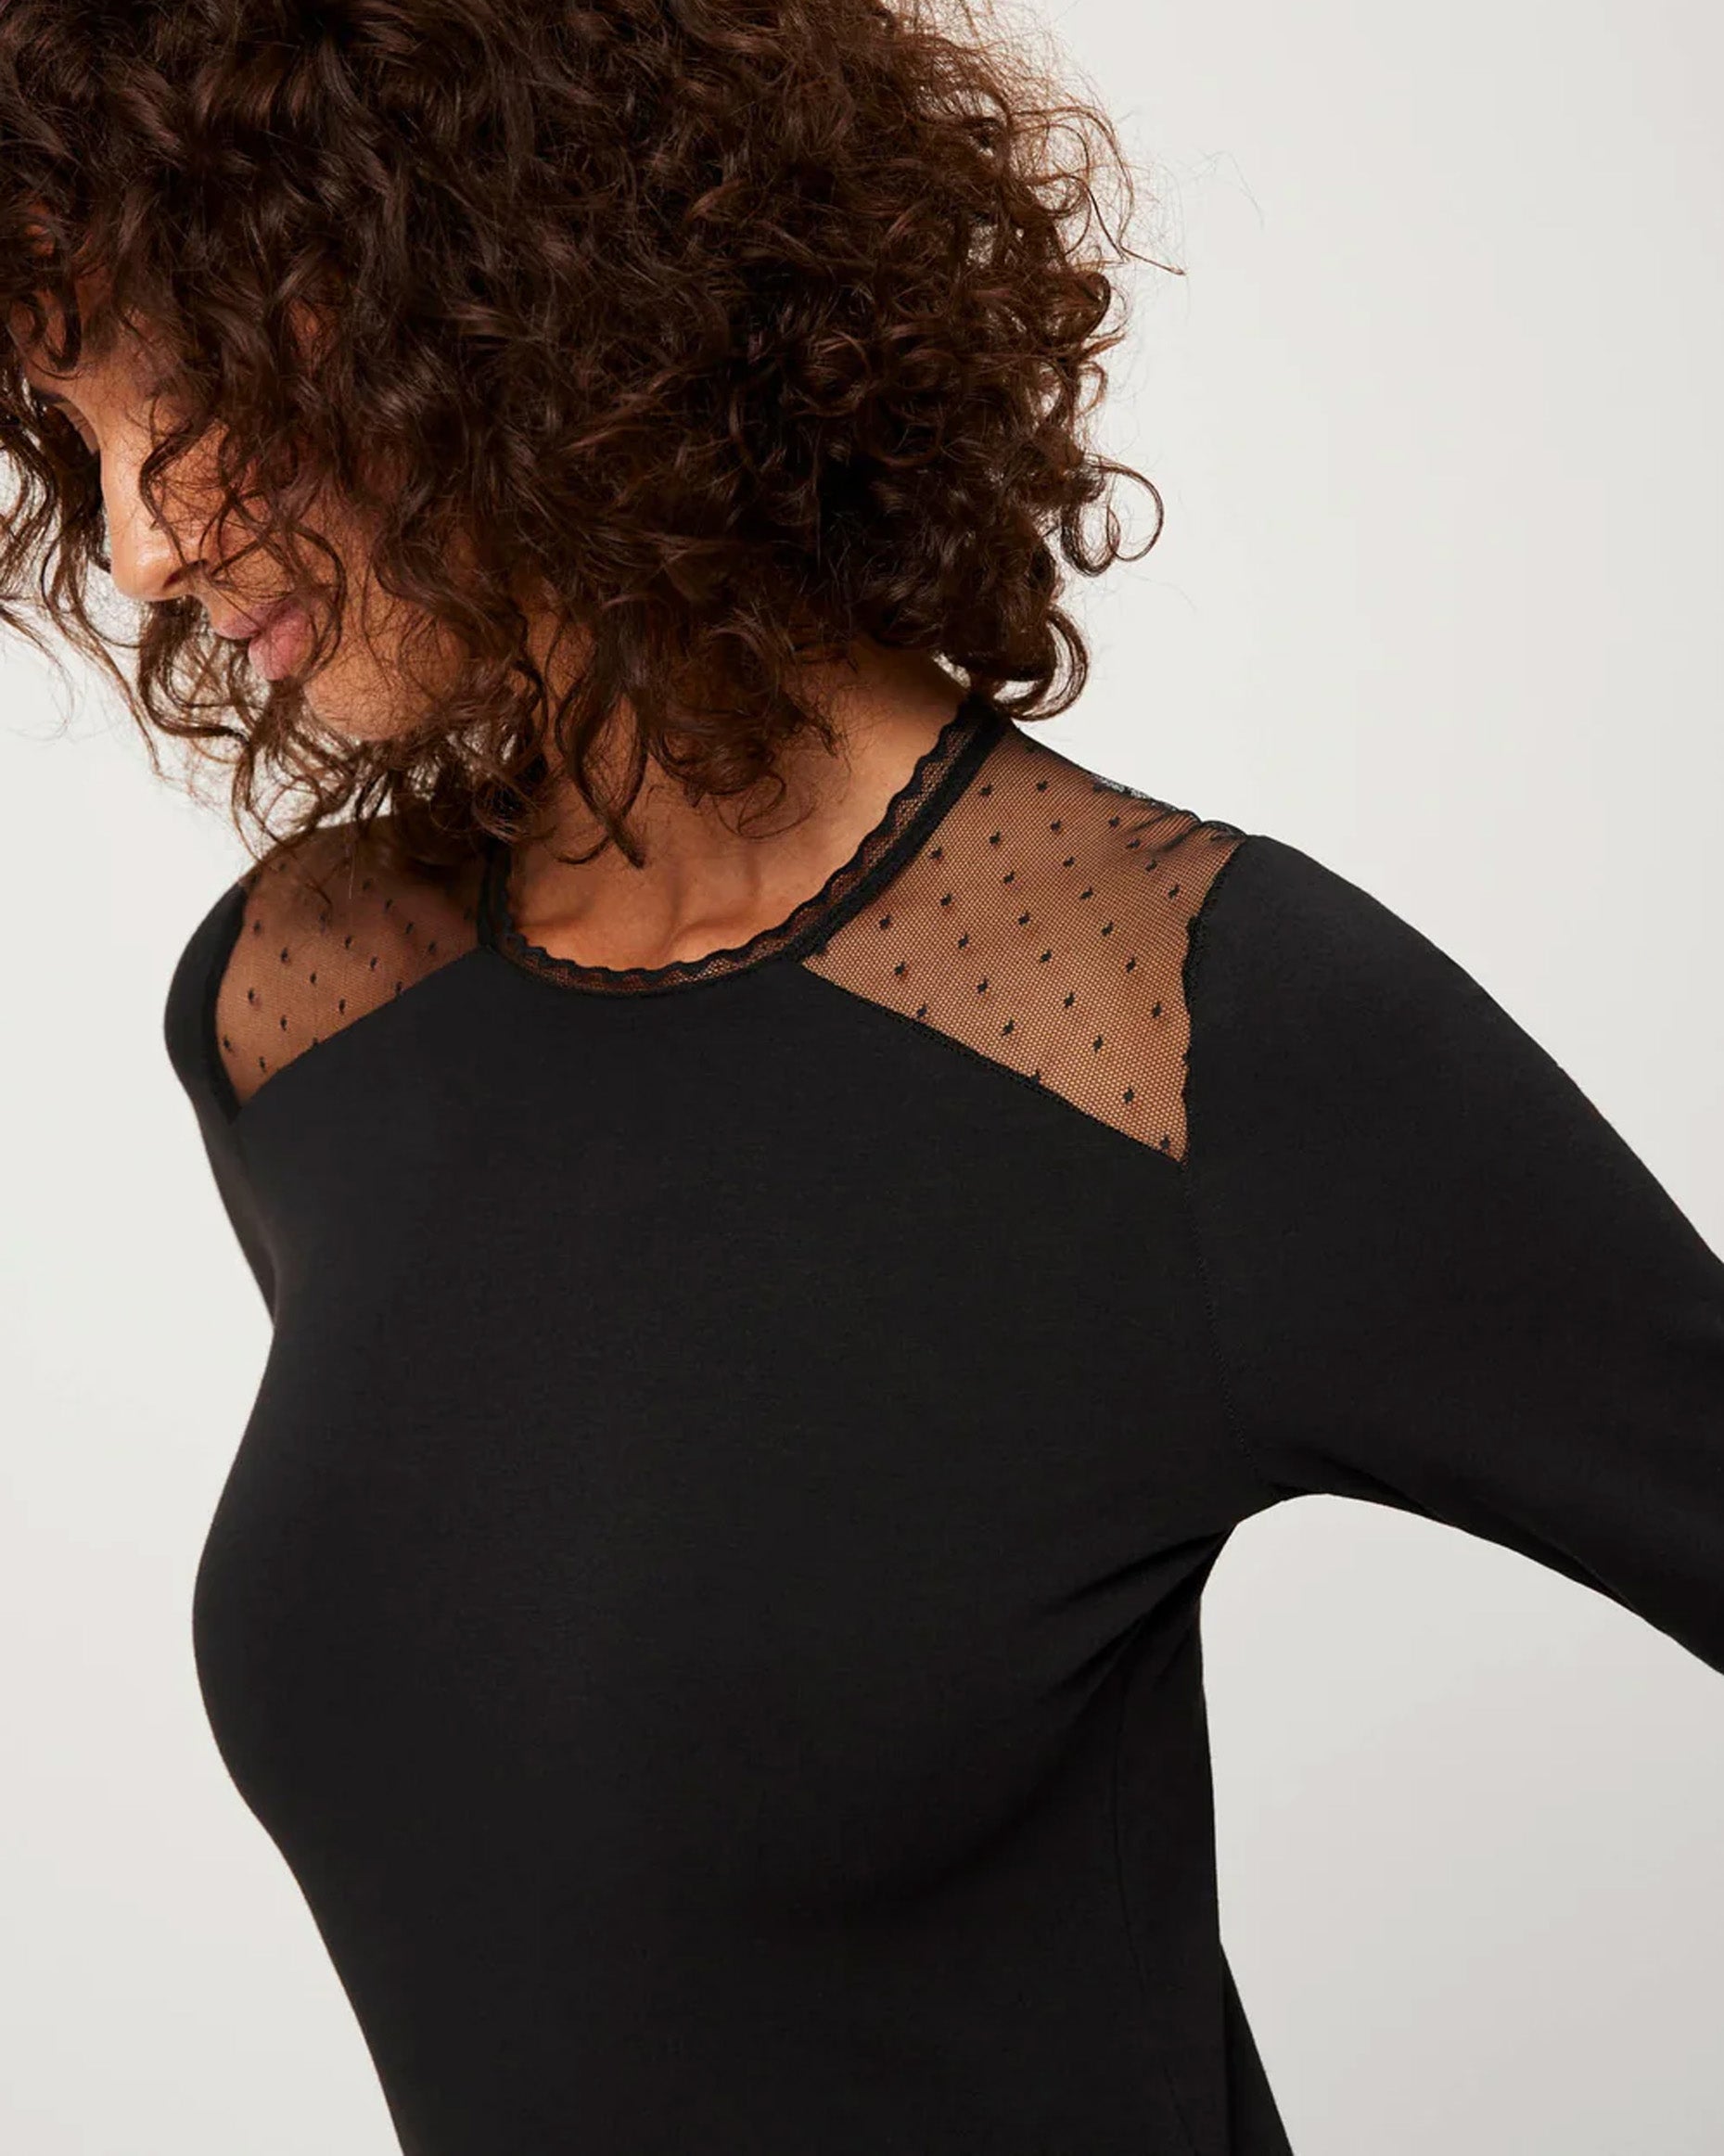 Ysabel Mora 19537 Tulle Shoulder Top - Black soft and light long sleeved cotton top with sheer spot pattern mesh panels on the shoulders and scalloped crew neck trim.